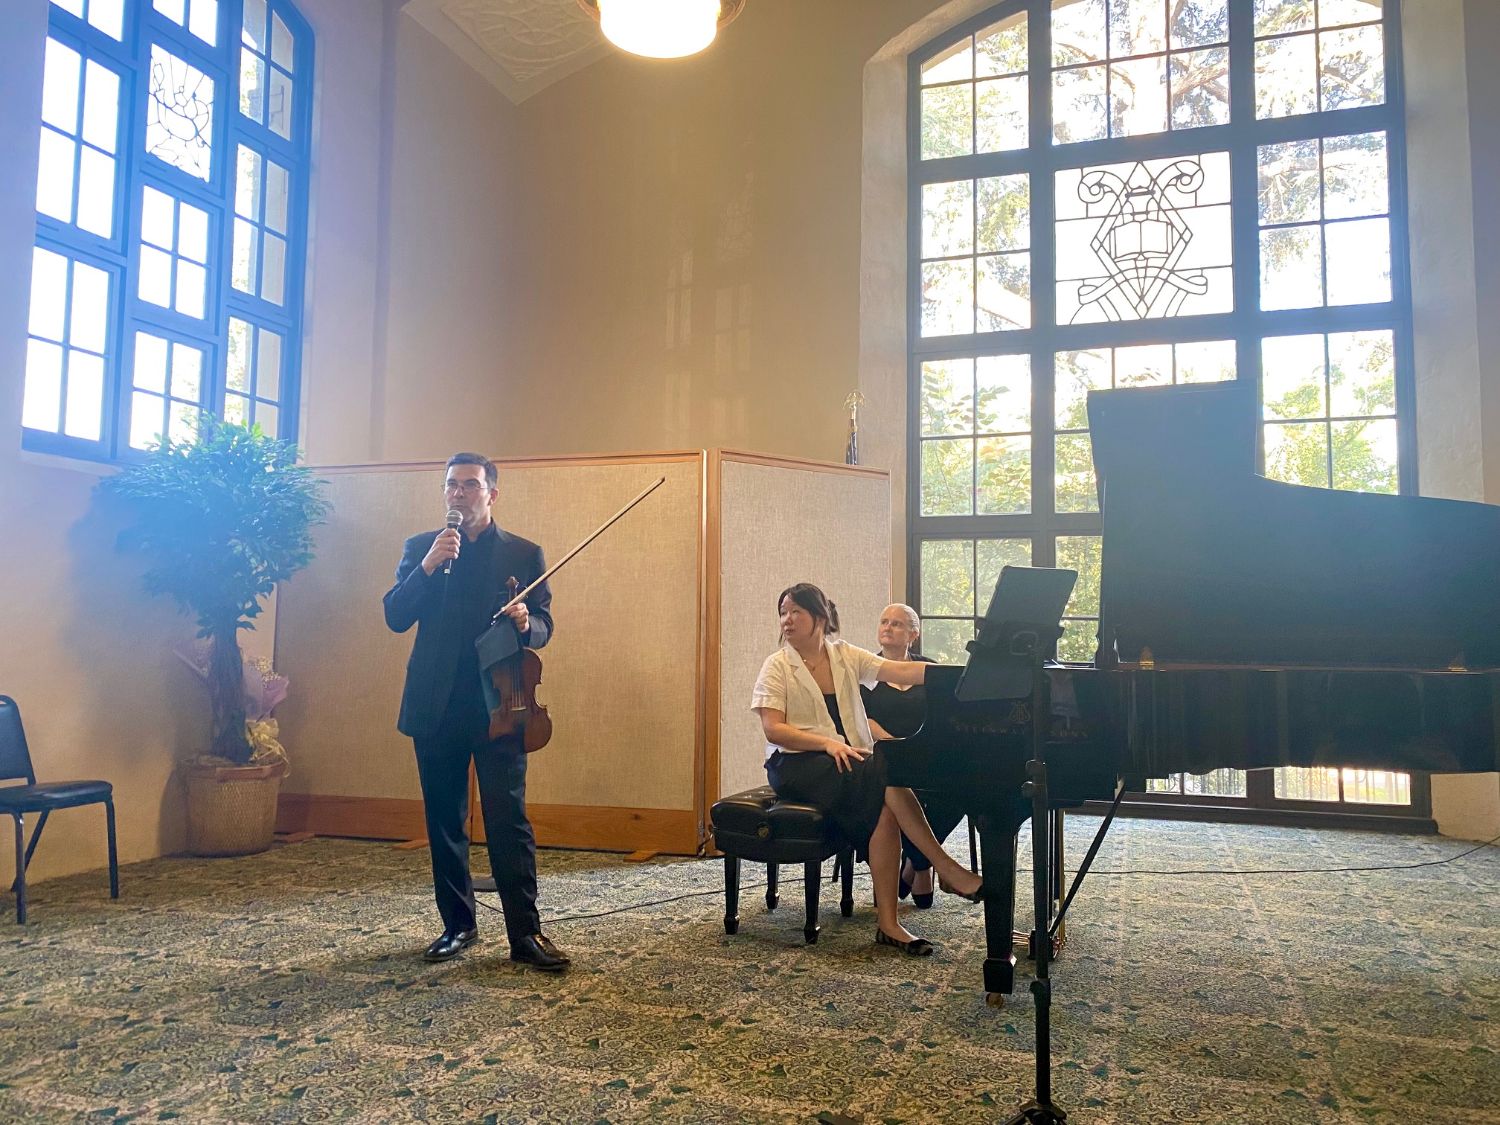 PHOTO: Alisa Hayashida | The South Pasadenan | First Associate Concertmaster, violinist Nathan Cole, and concert pianist, Cindy Lam, perform at the Restoration Concert at South Pasadena Public Library.